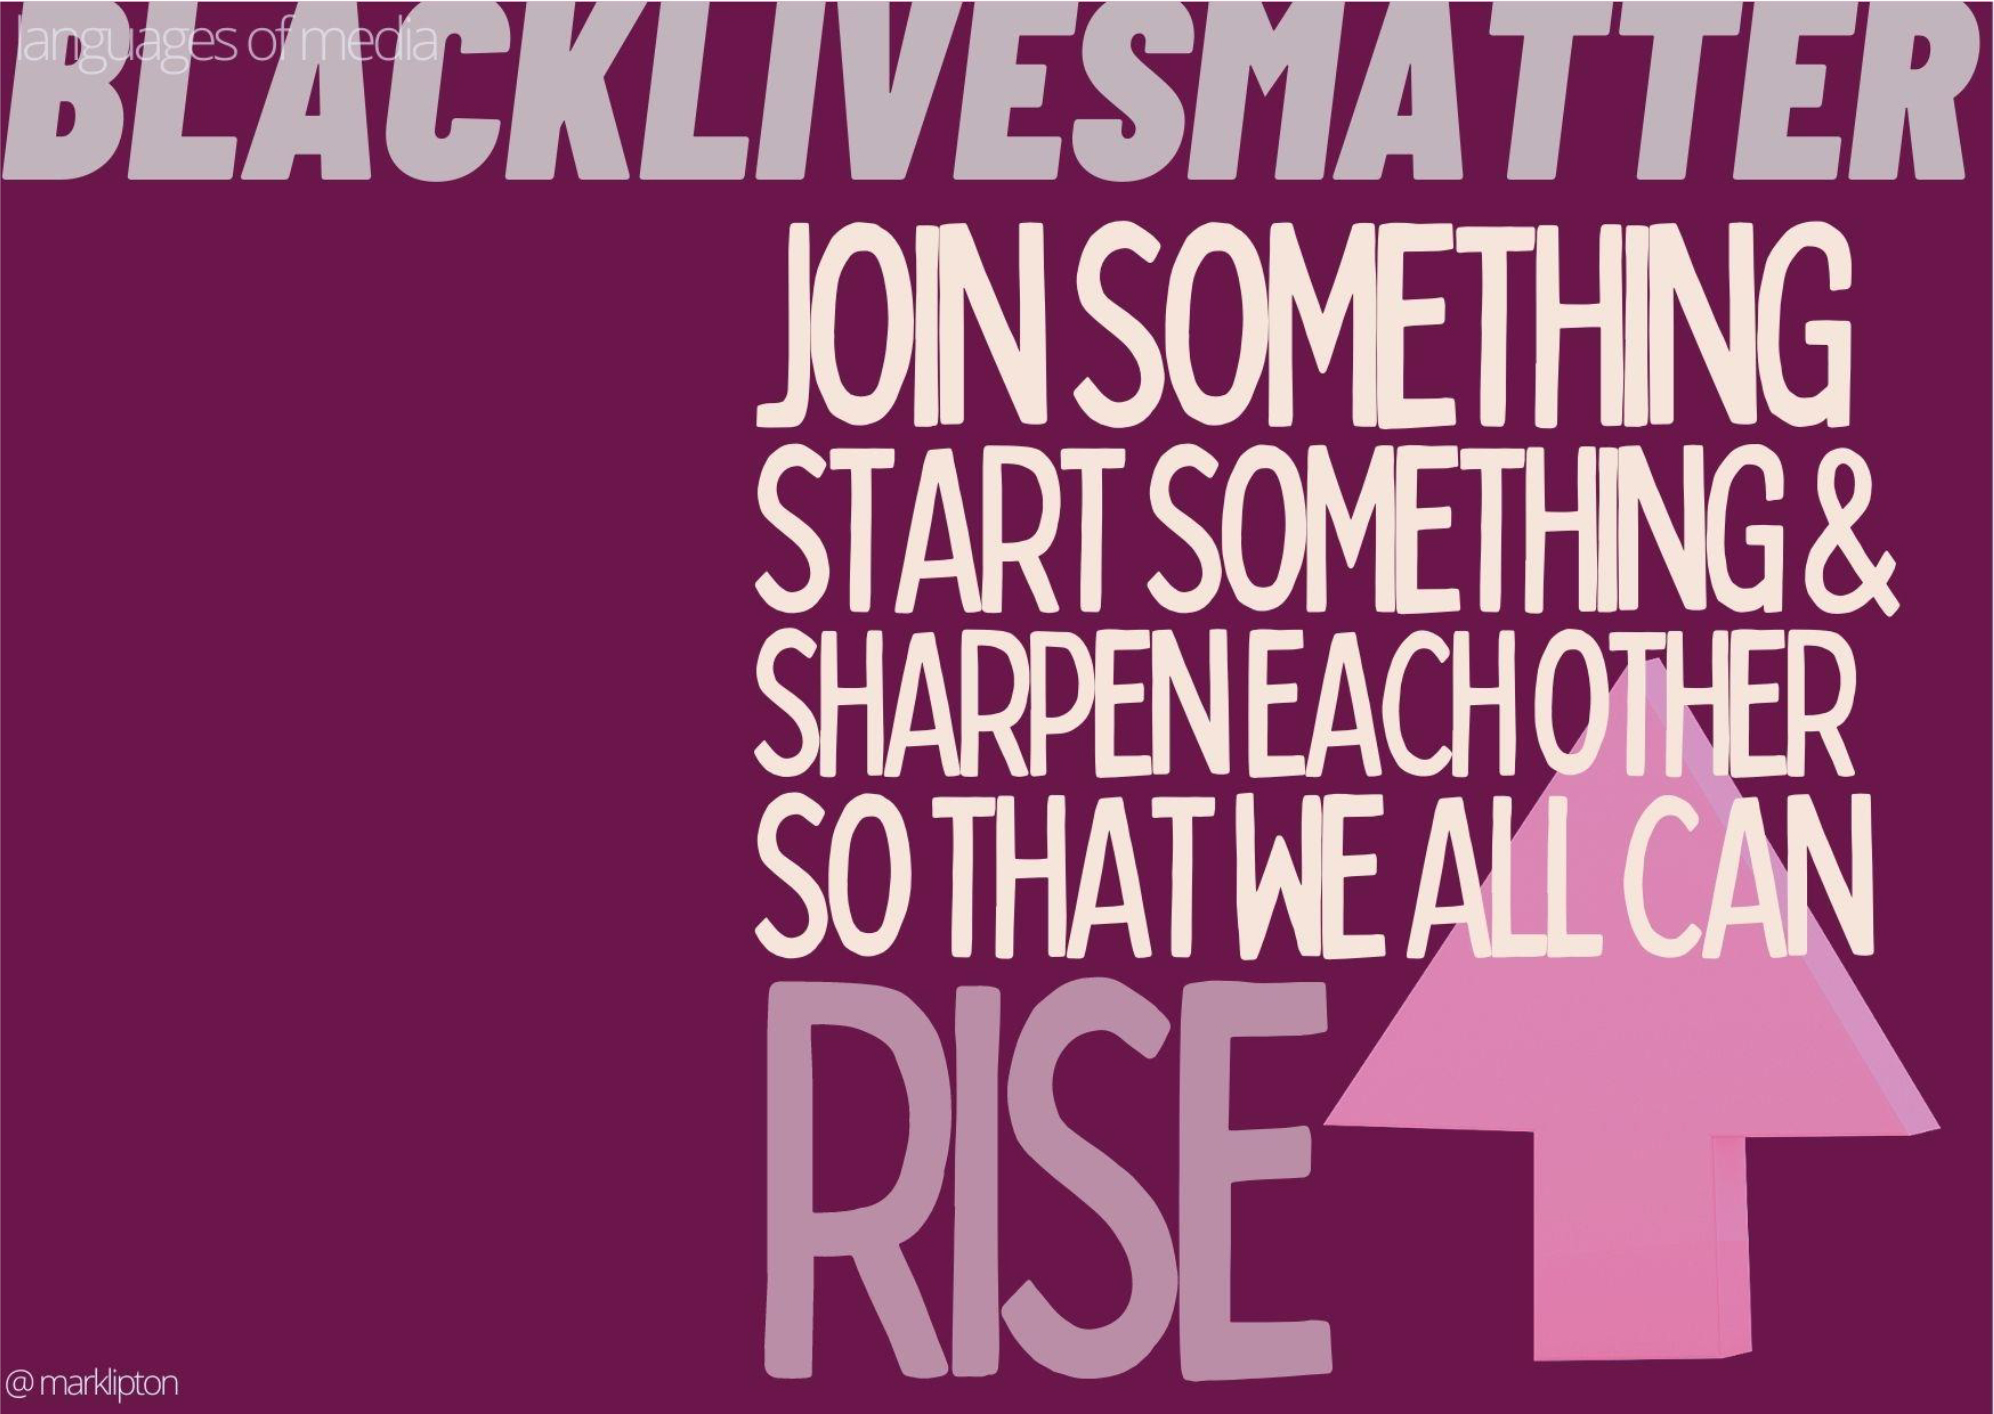 image: Black Lives Matter: Join something, start something and sharpen each other so that we all can rise.]